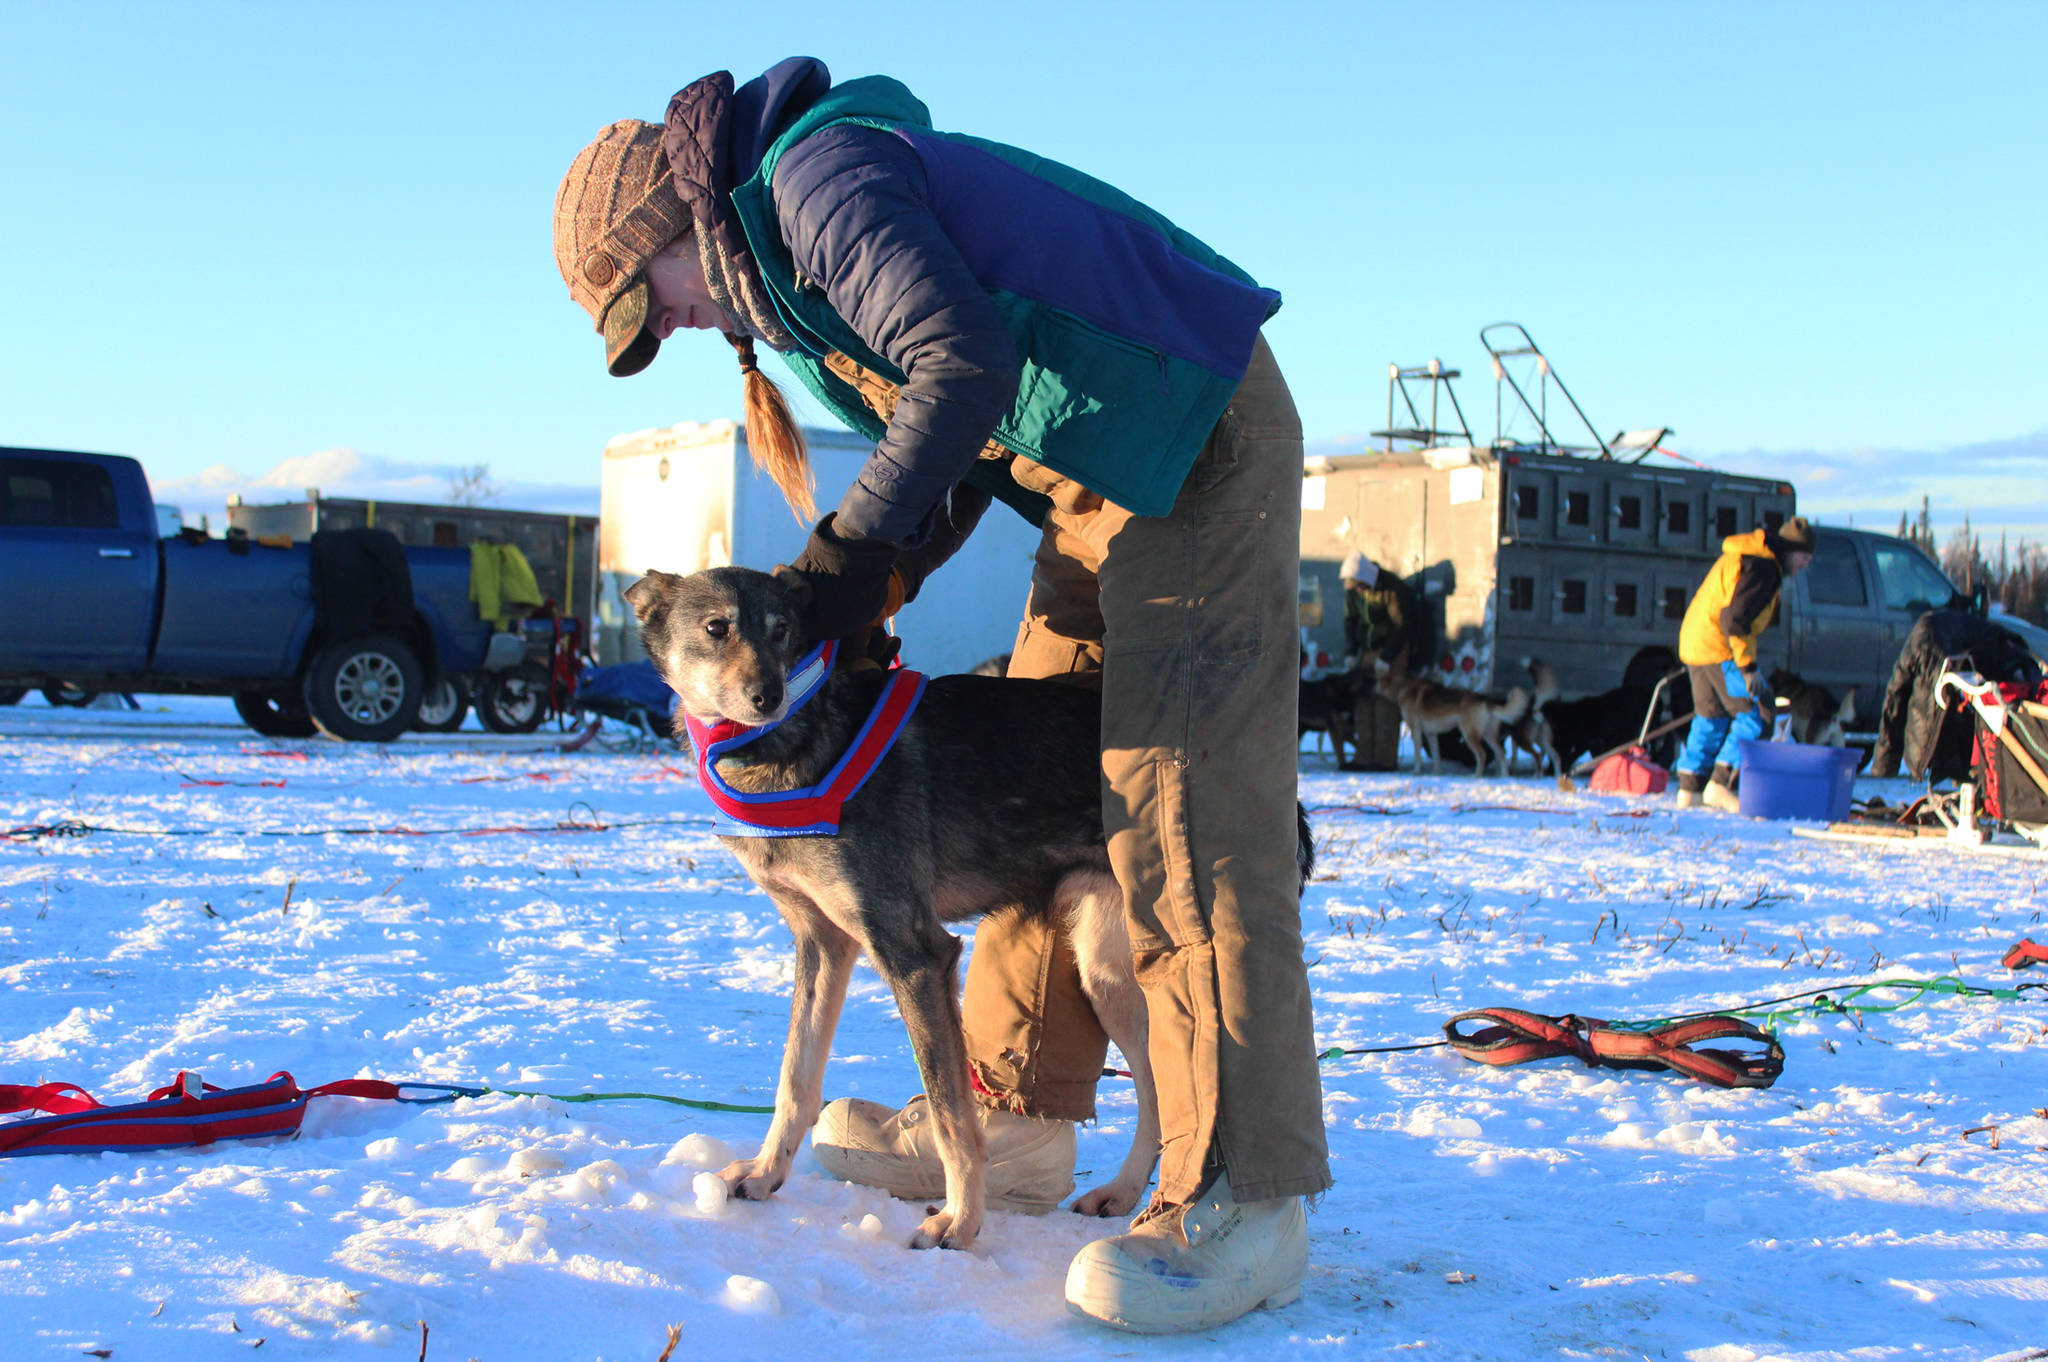 Musher Emily Maxwell puts a harness on one of her lead dogs, Beemer, before the start of this year’s Tustumena 200 Sled Dog Race Saturday, Jan. 27, 2018 at Freddie’s Roadhouse in Ninilchik, Alaska. This is Maxwell’s first time running the T200, which returned last year after being canceled for three years in a row due to lack of snow. (Photo by Megan Pacer/Homer News)